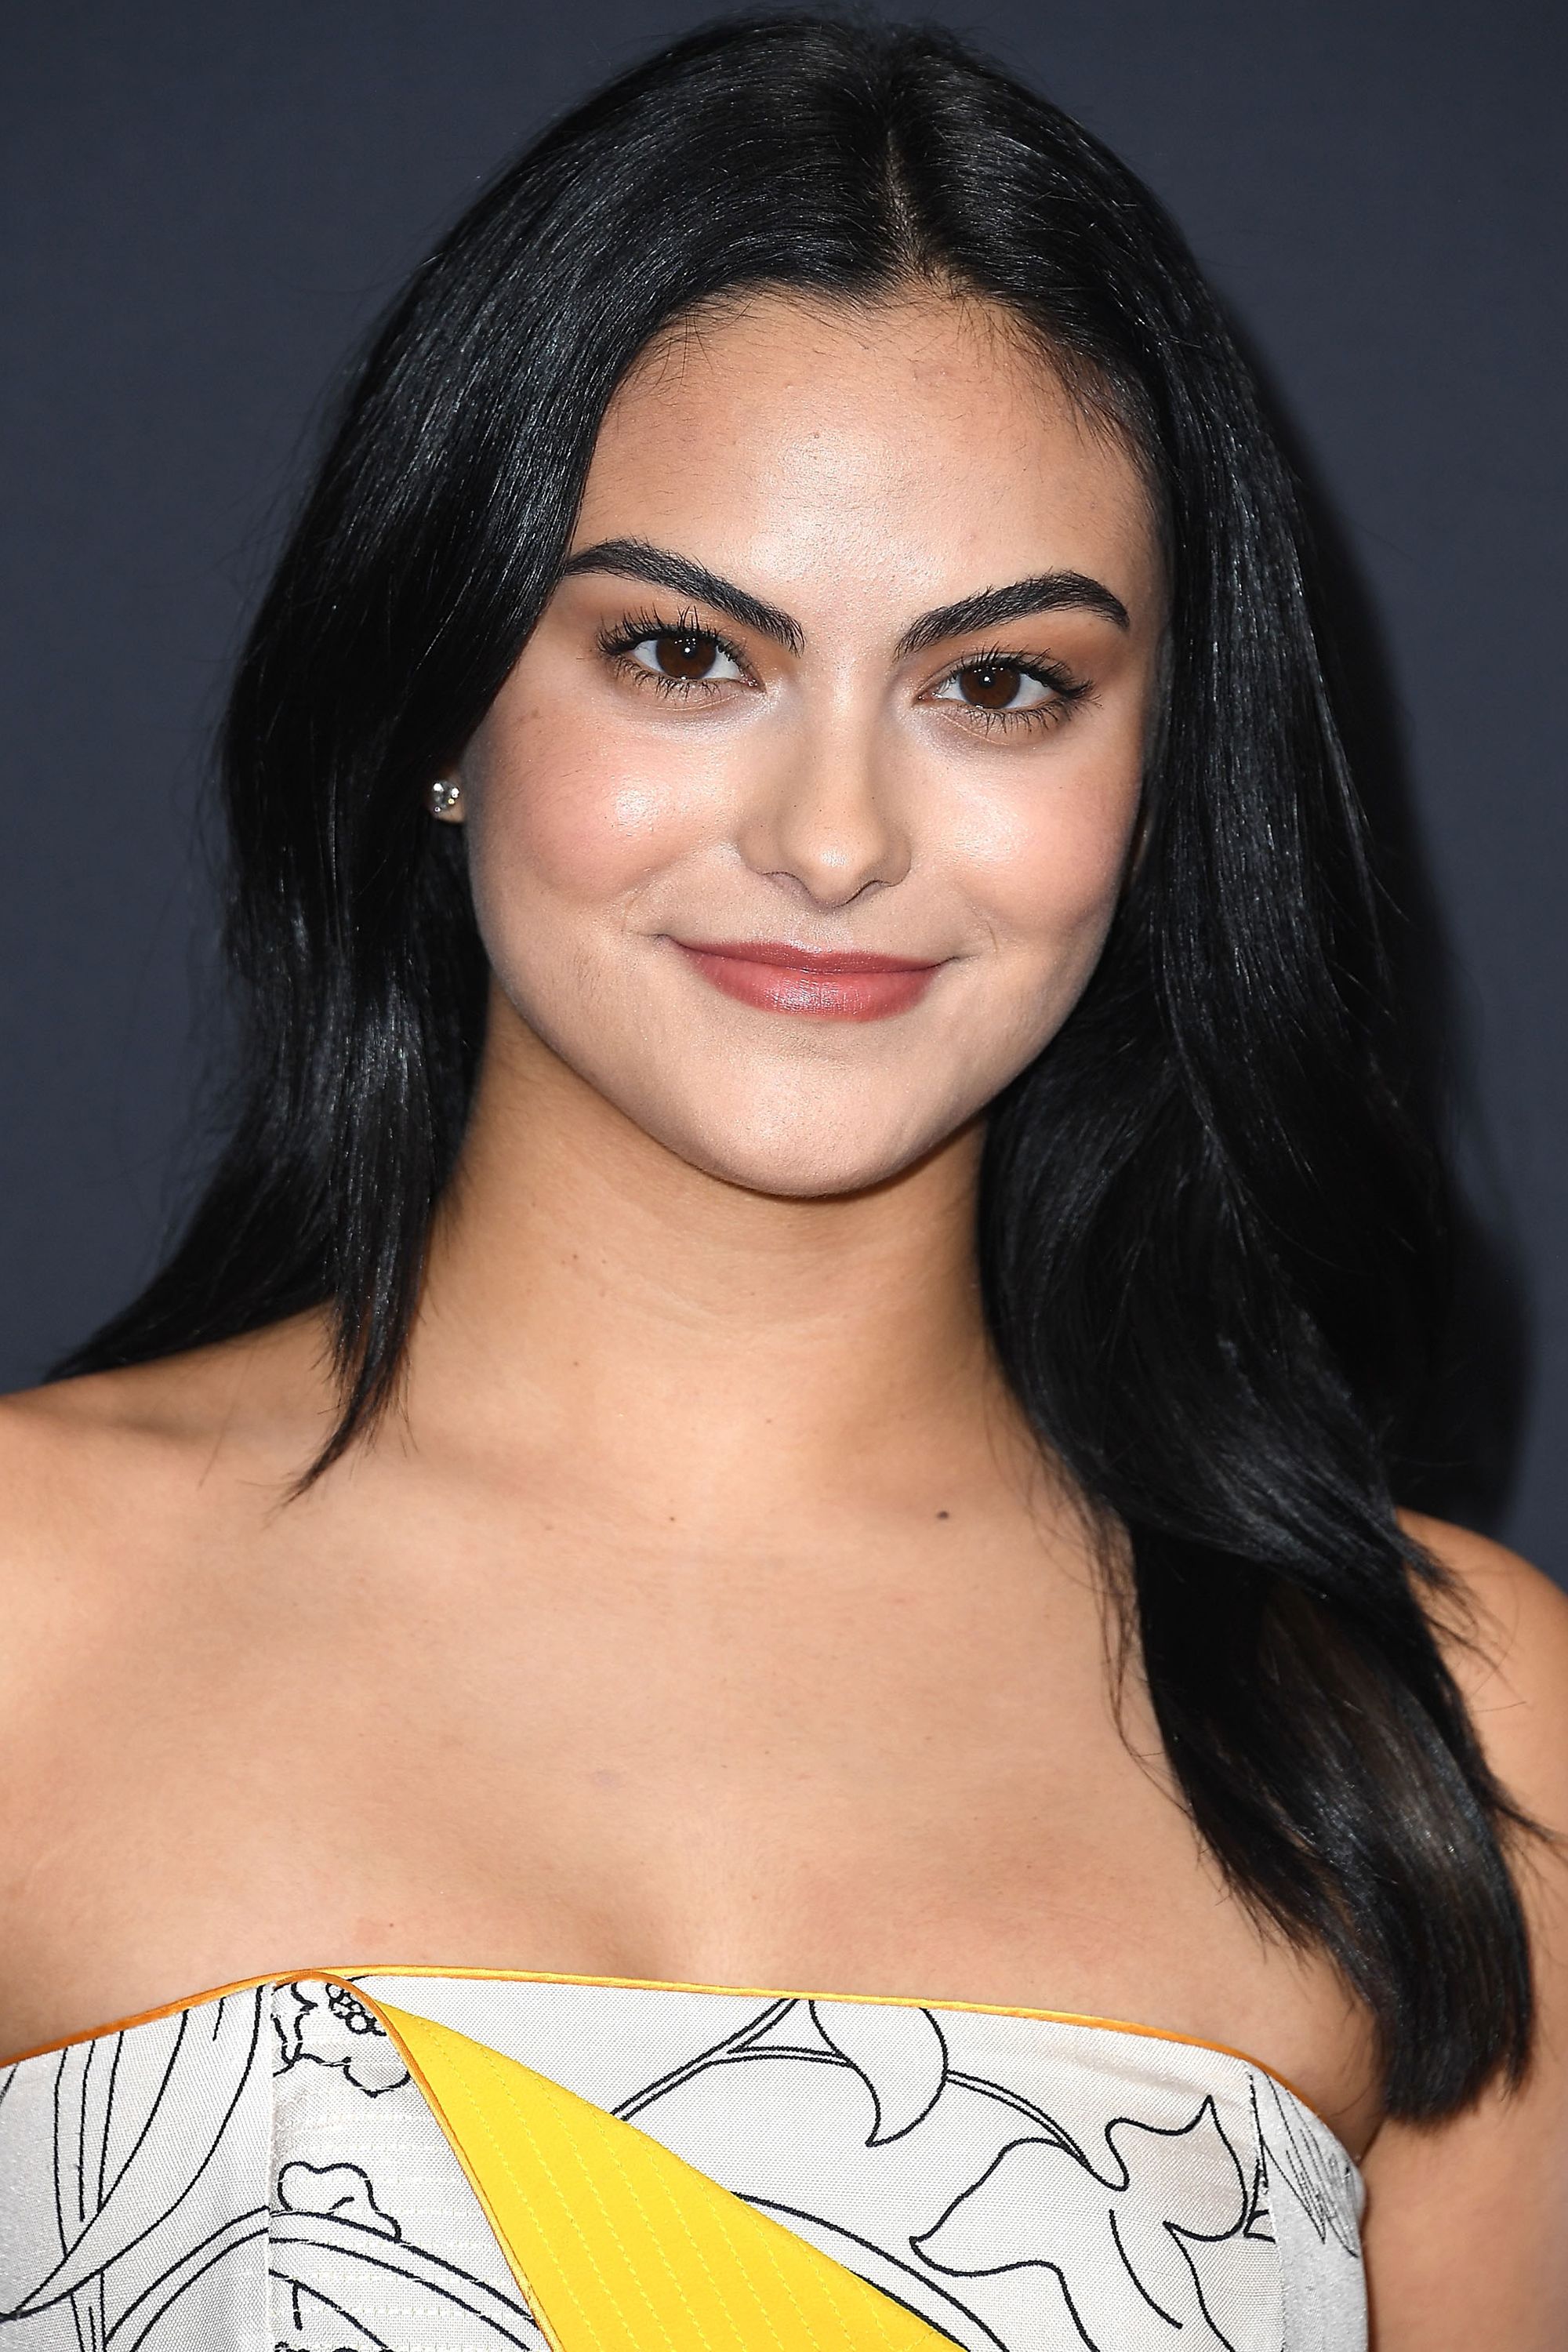 Hbz Winter Hair Colors Camila Mendes Gettyimages 1060577344 